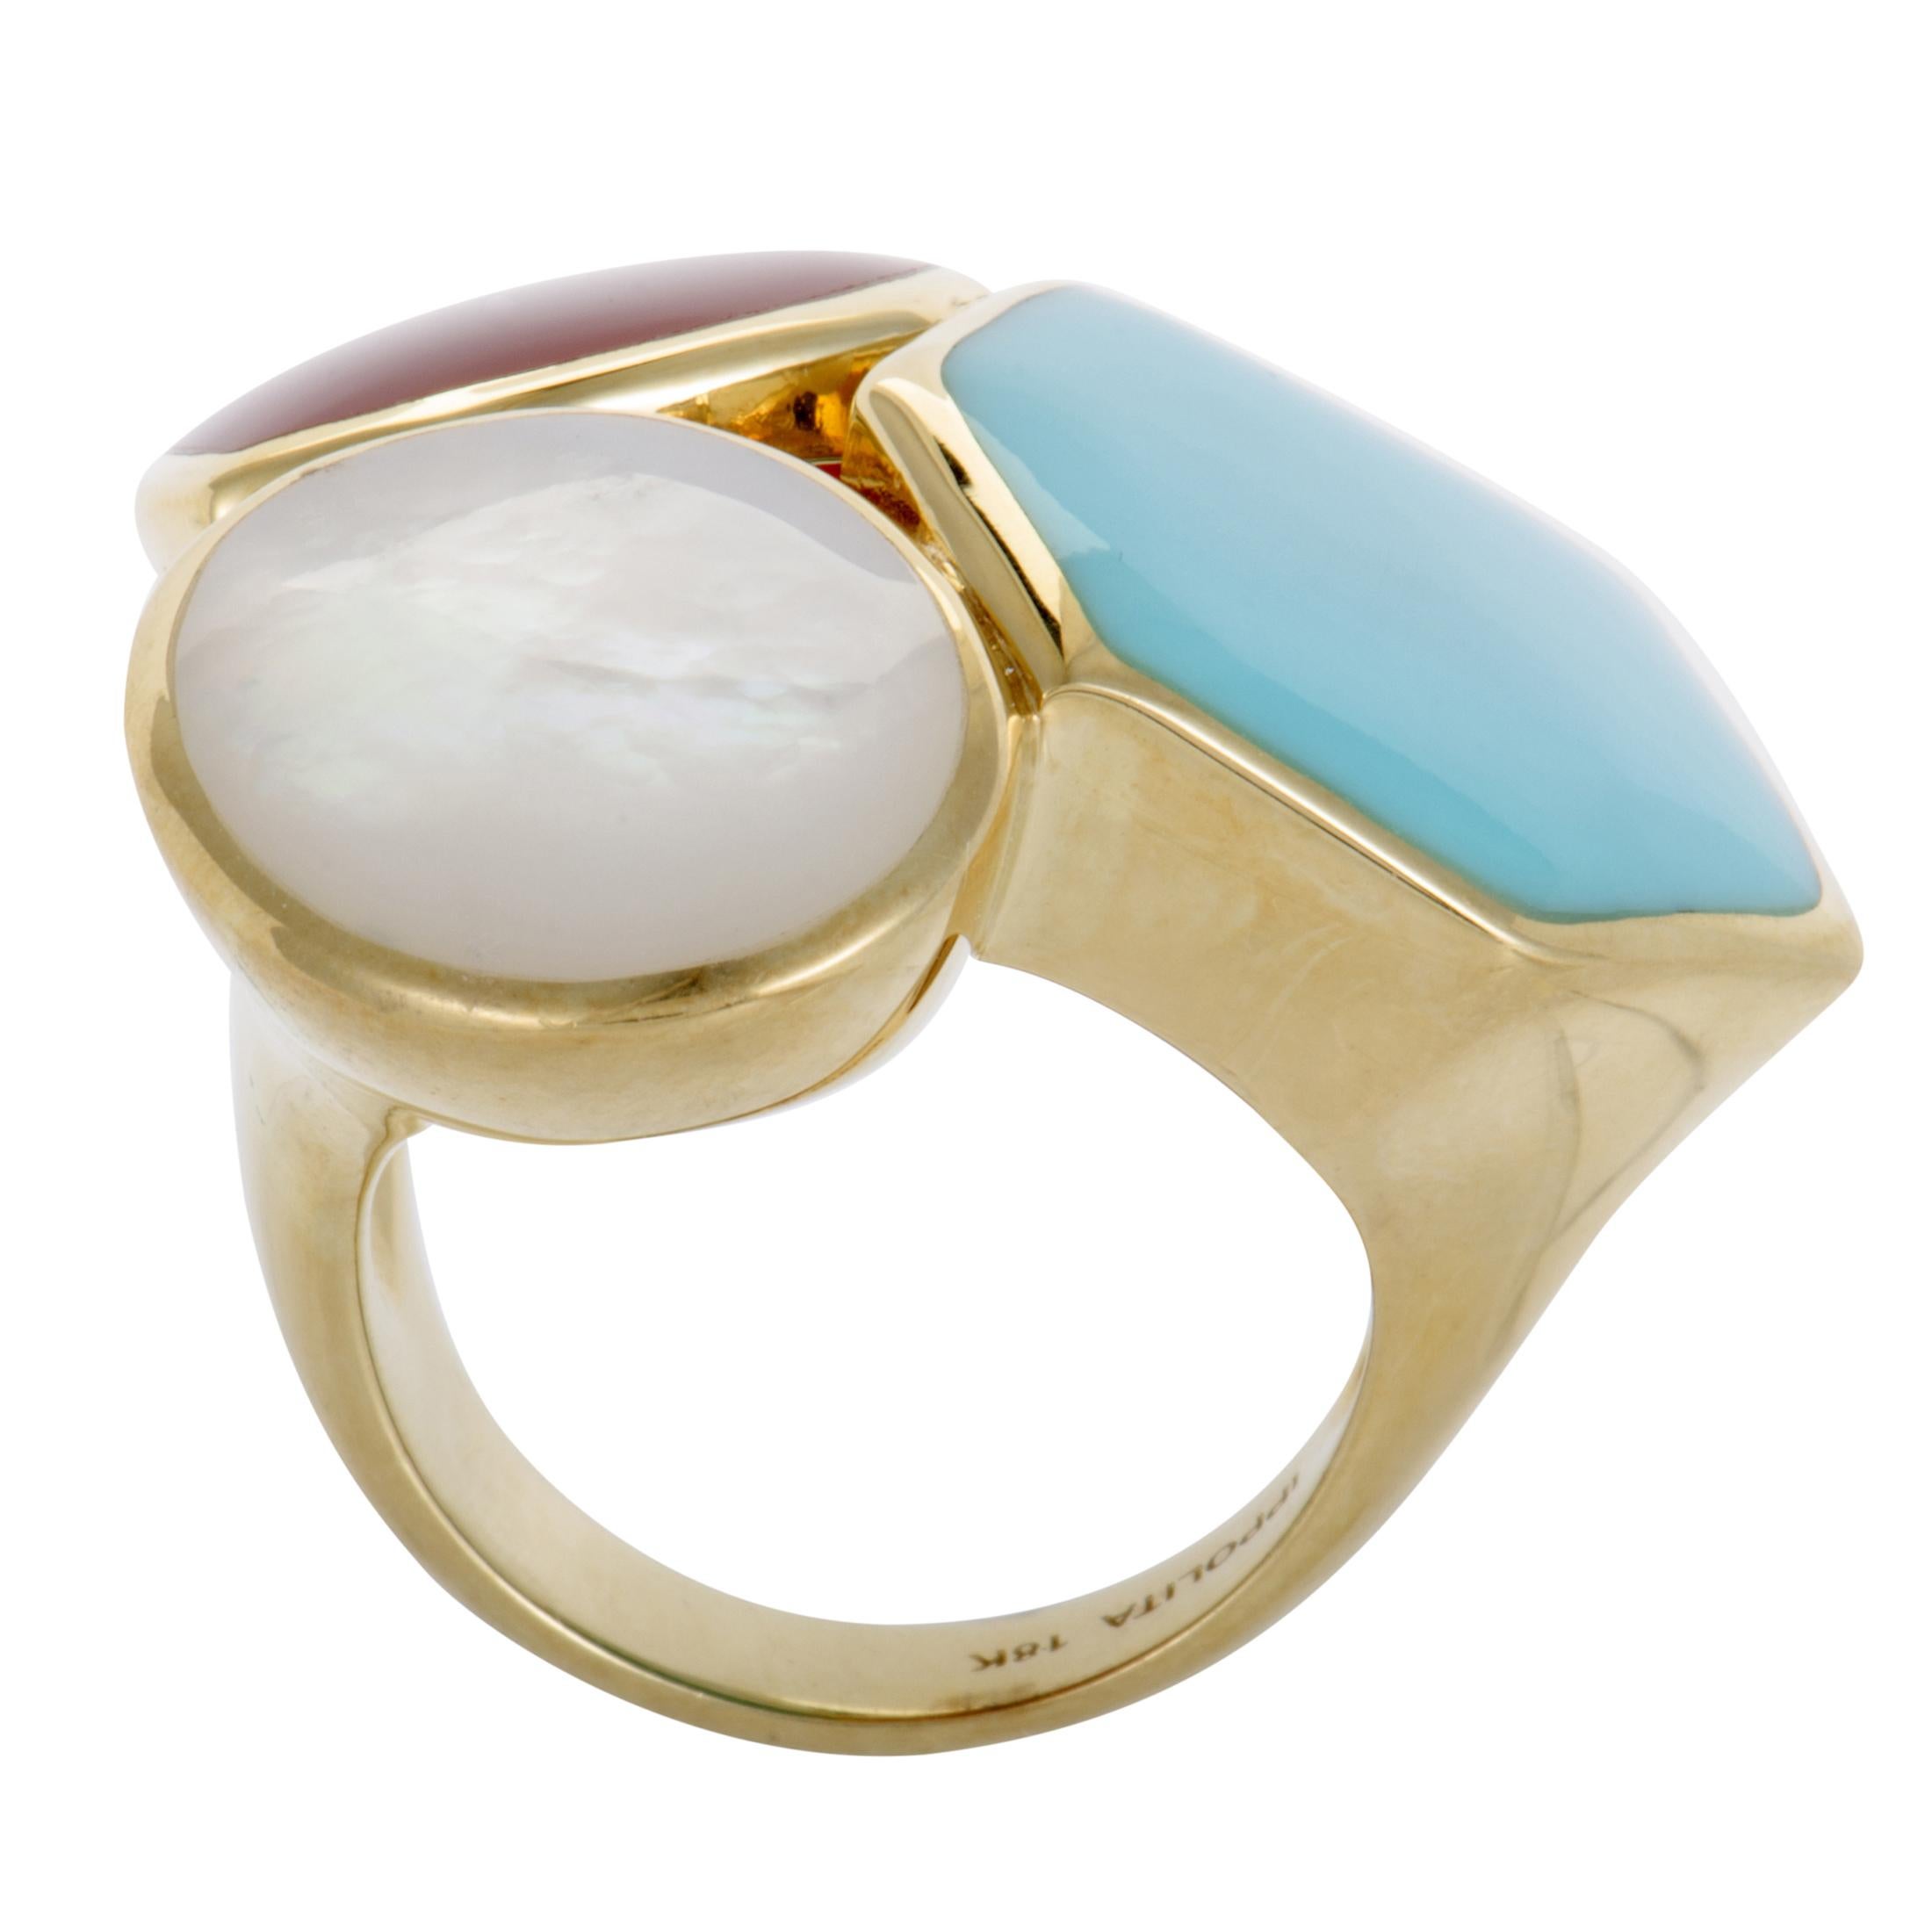 Made of radiant 18K yellow gold and set with three exceptionally alluring stones, this superb ring from Ippolita’s “Rock Candy” collection offers attractive fashionable appearance.
Ring Top Dimensions: 35mm x 33mm